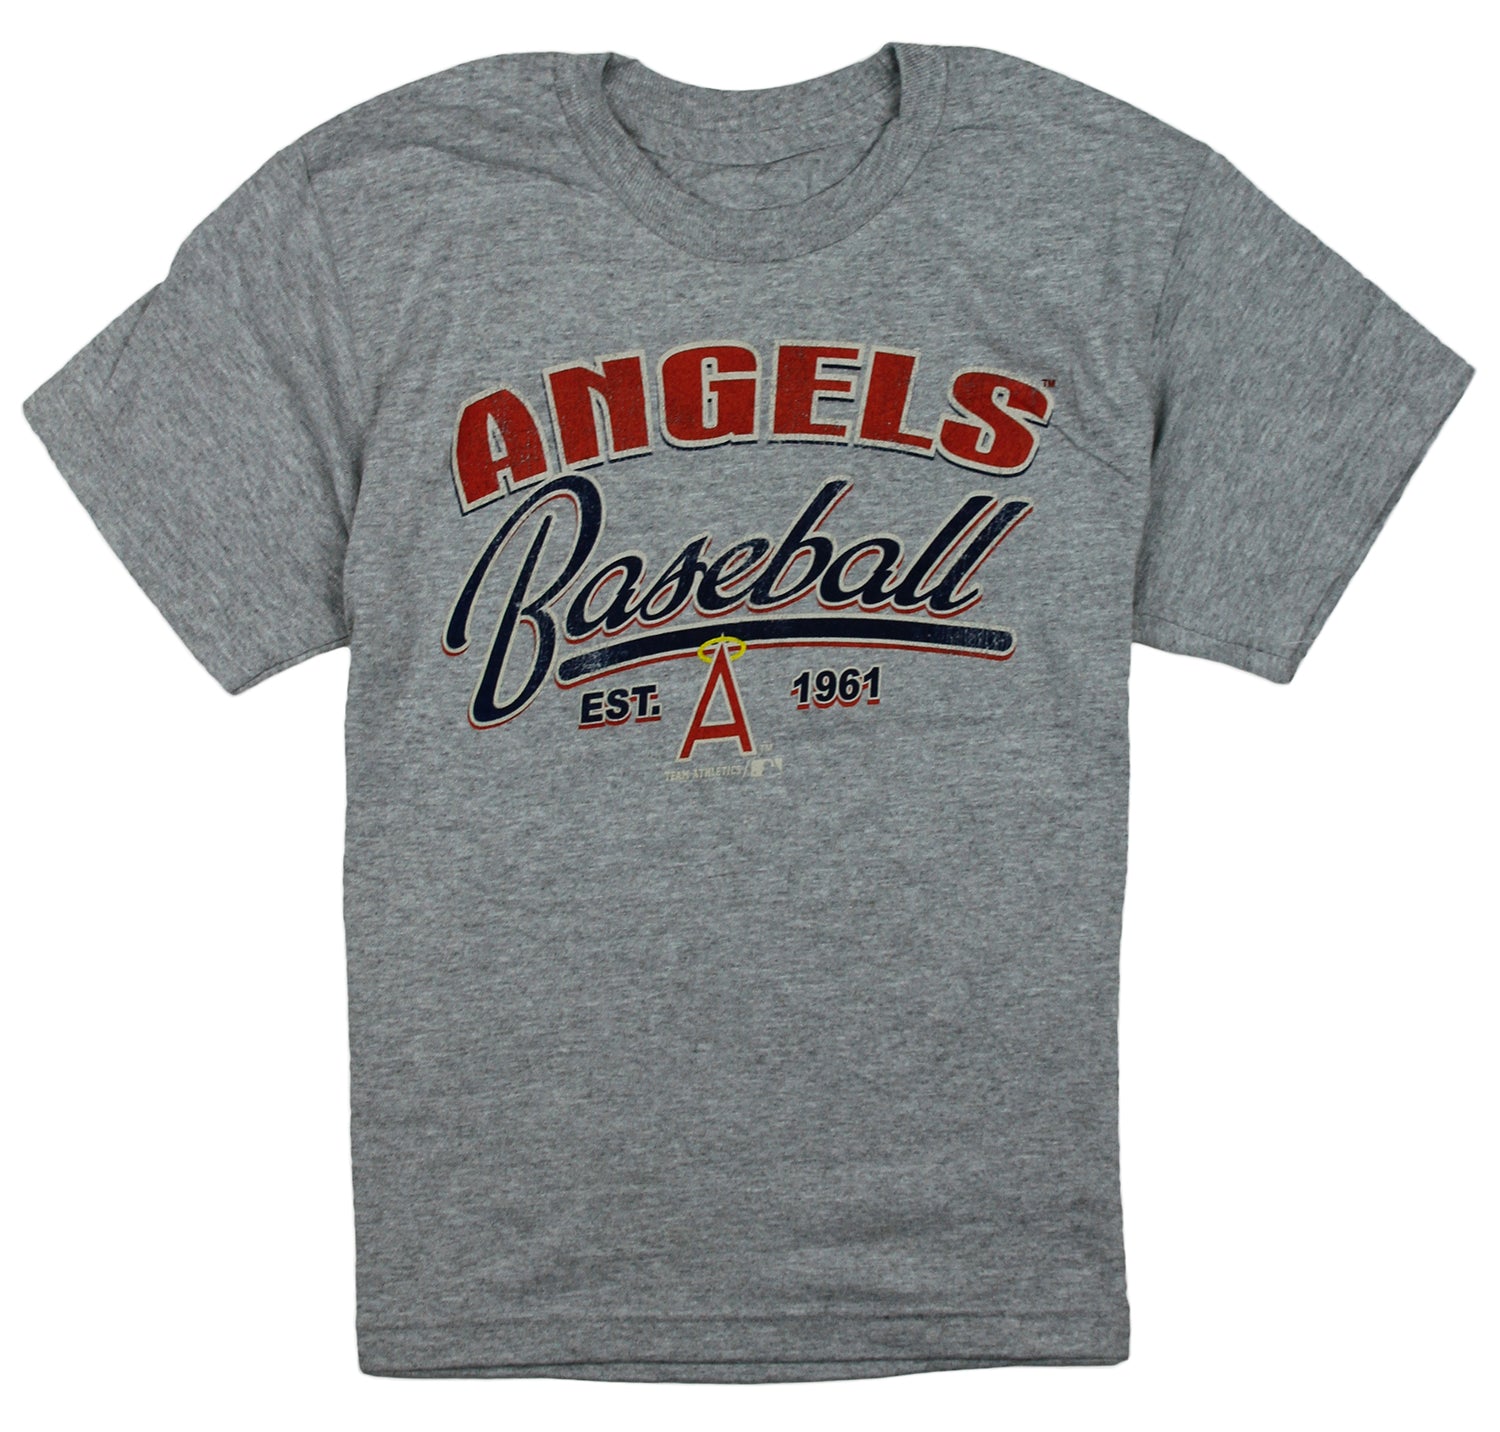 Gray Los Angeles Angels MLB Jerseys for sale